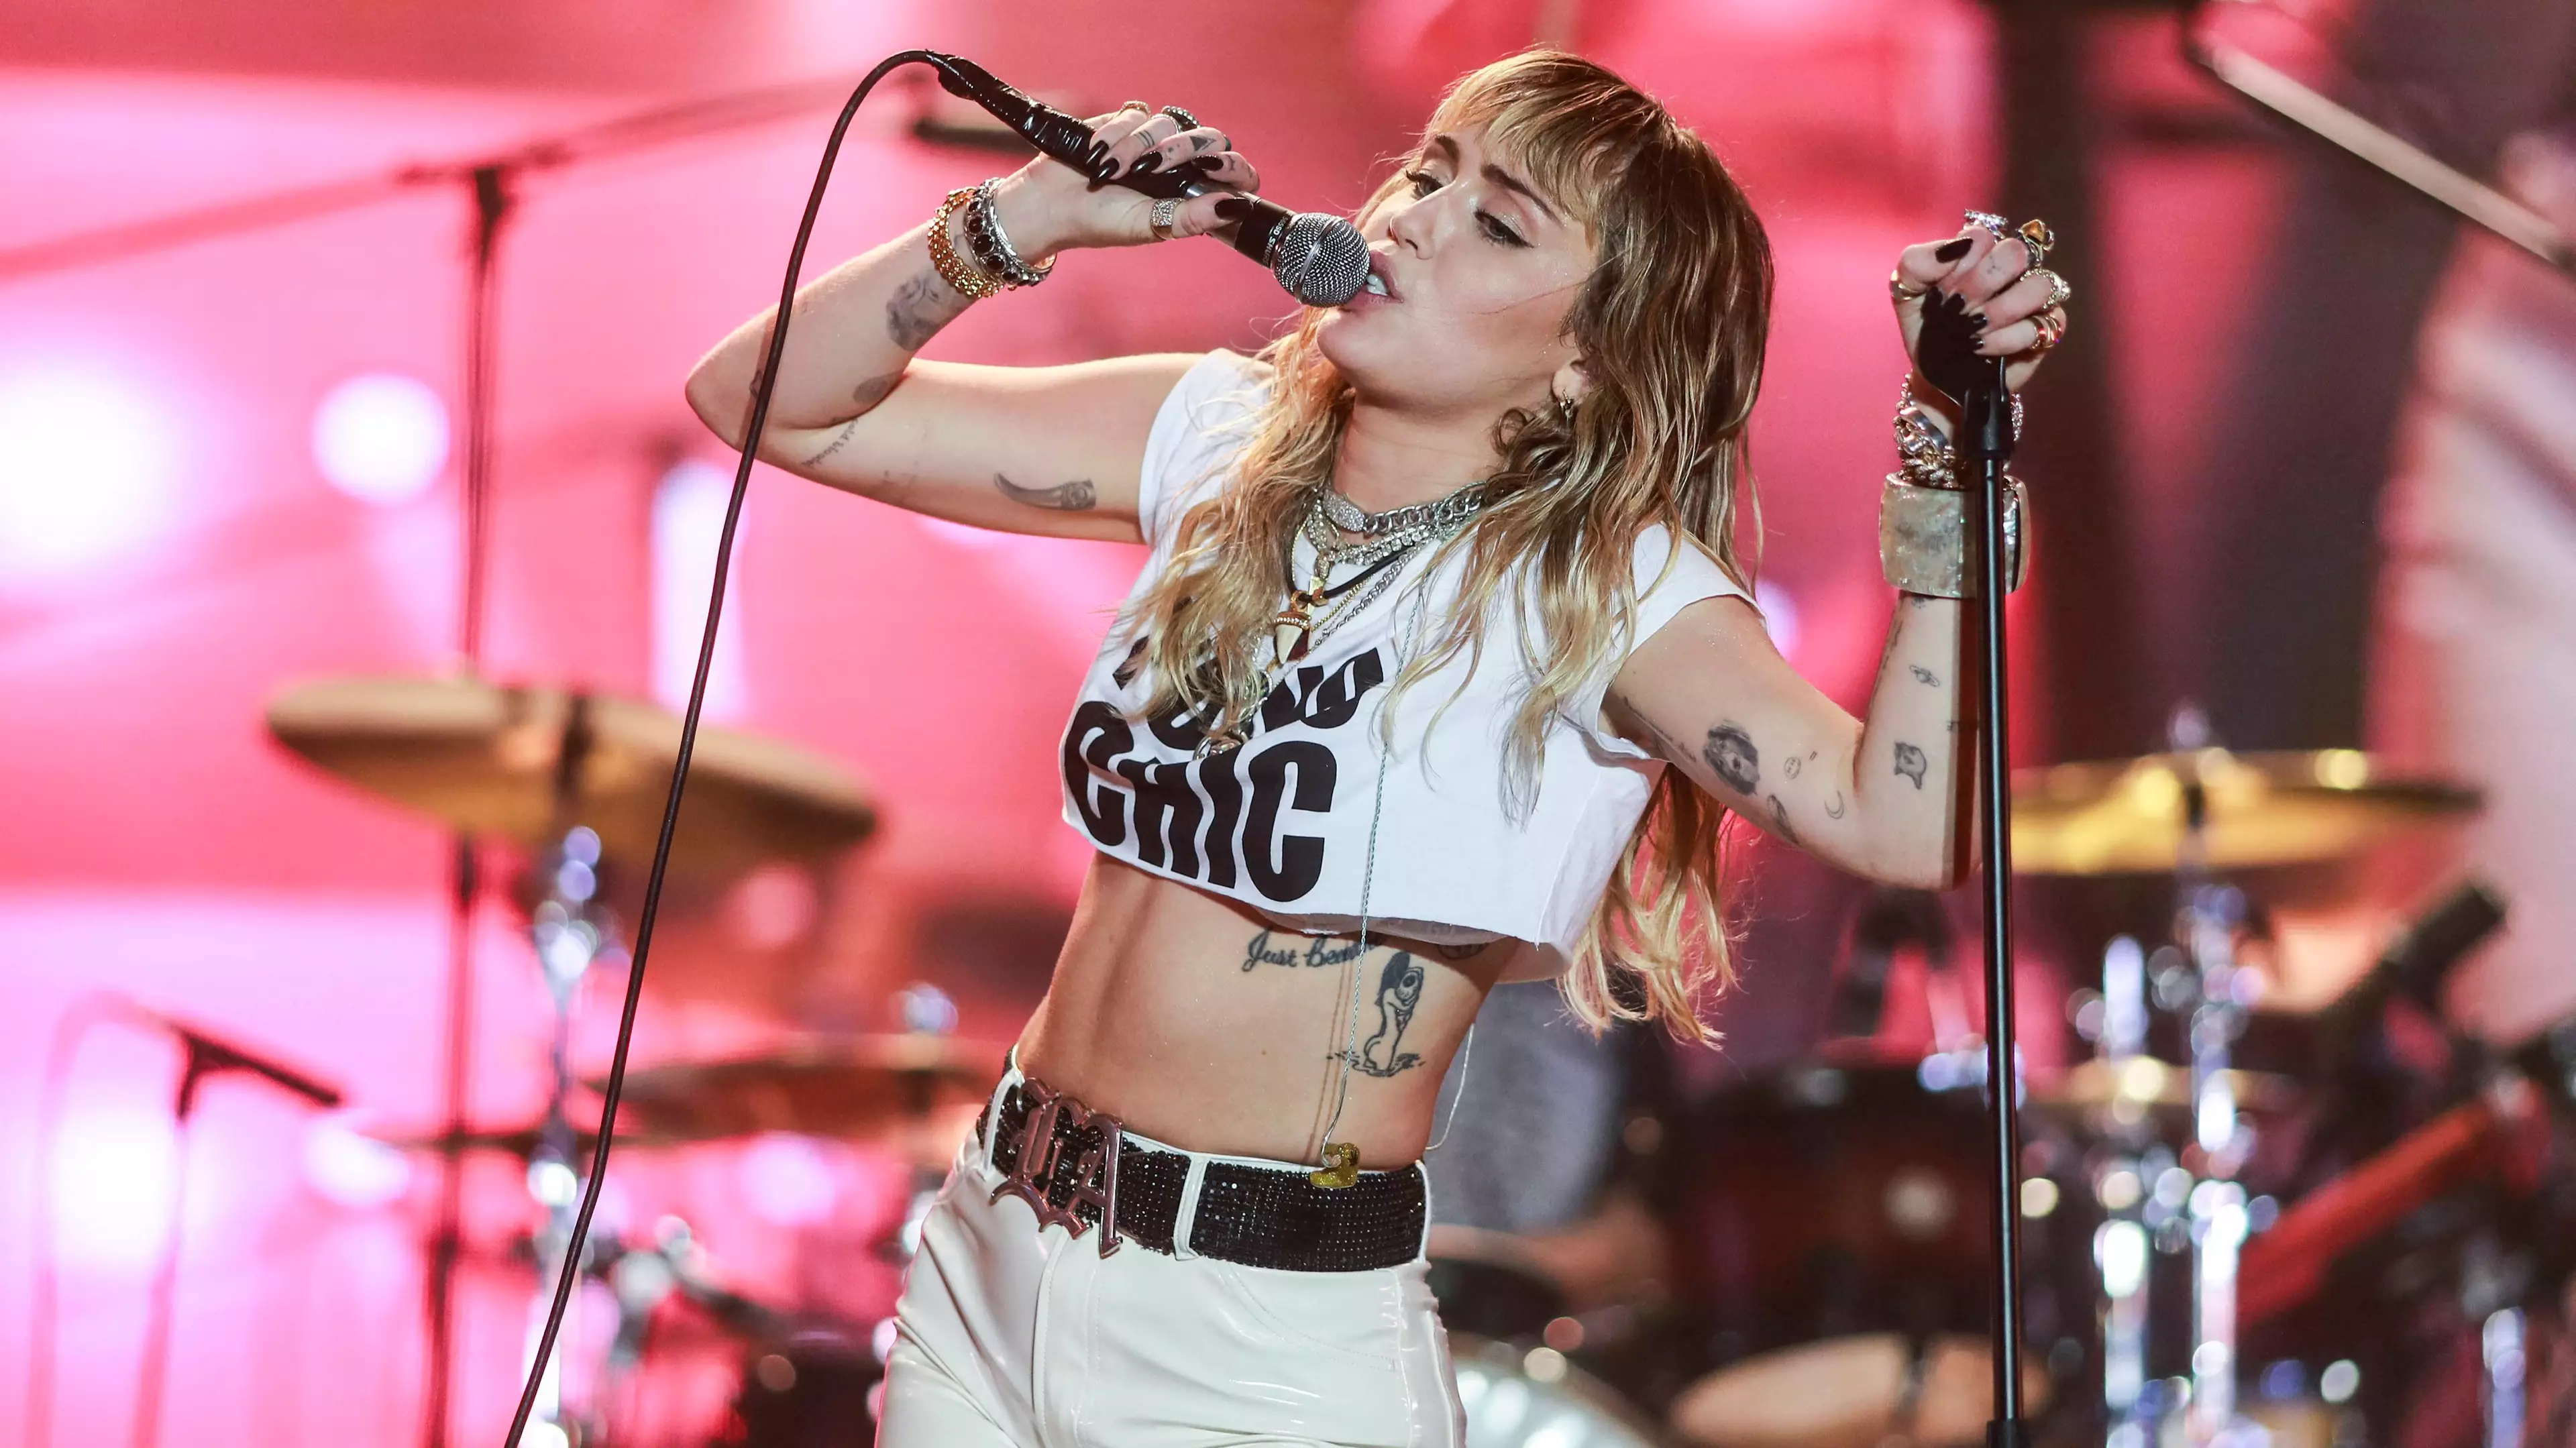 Miley Cyrus Speaks Out After Being Groped By A Fan In Barcelona